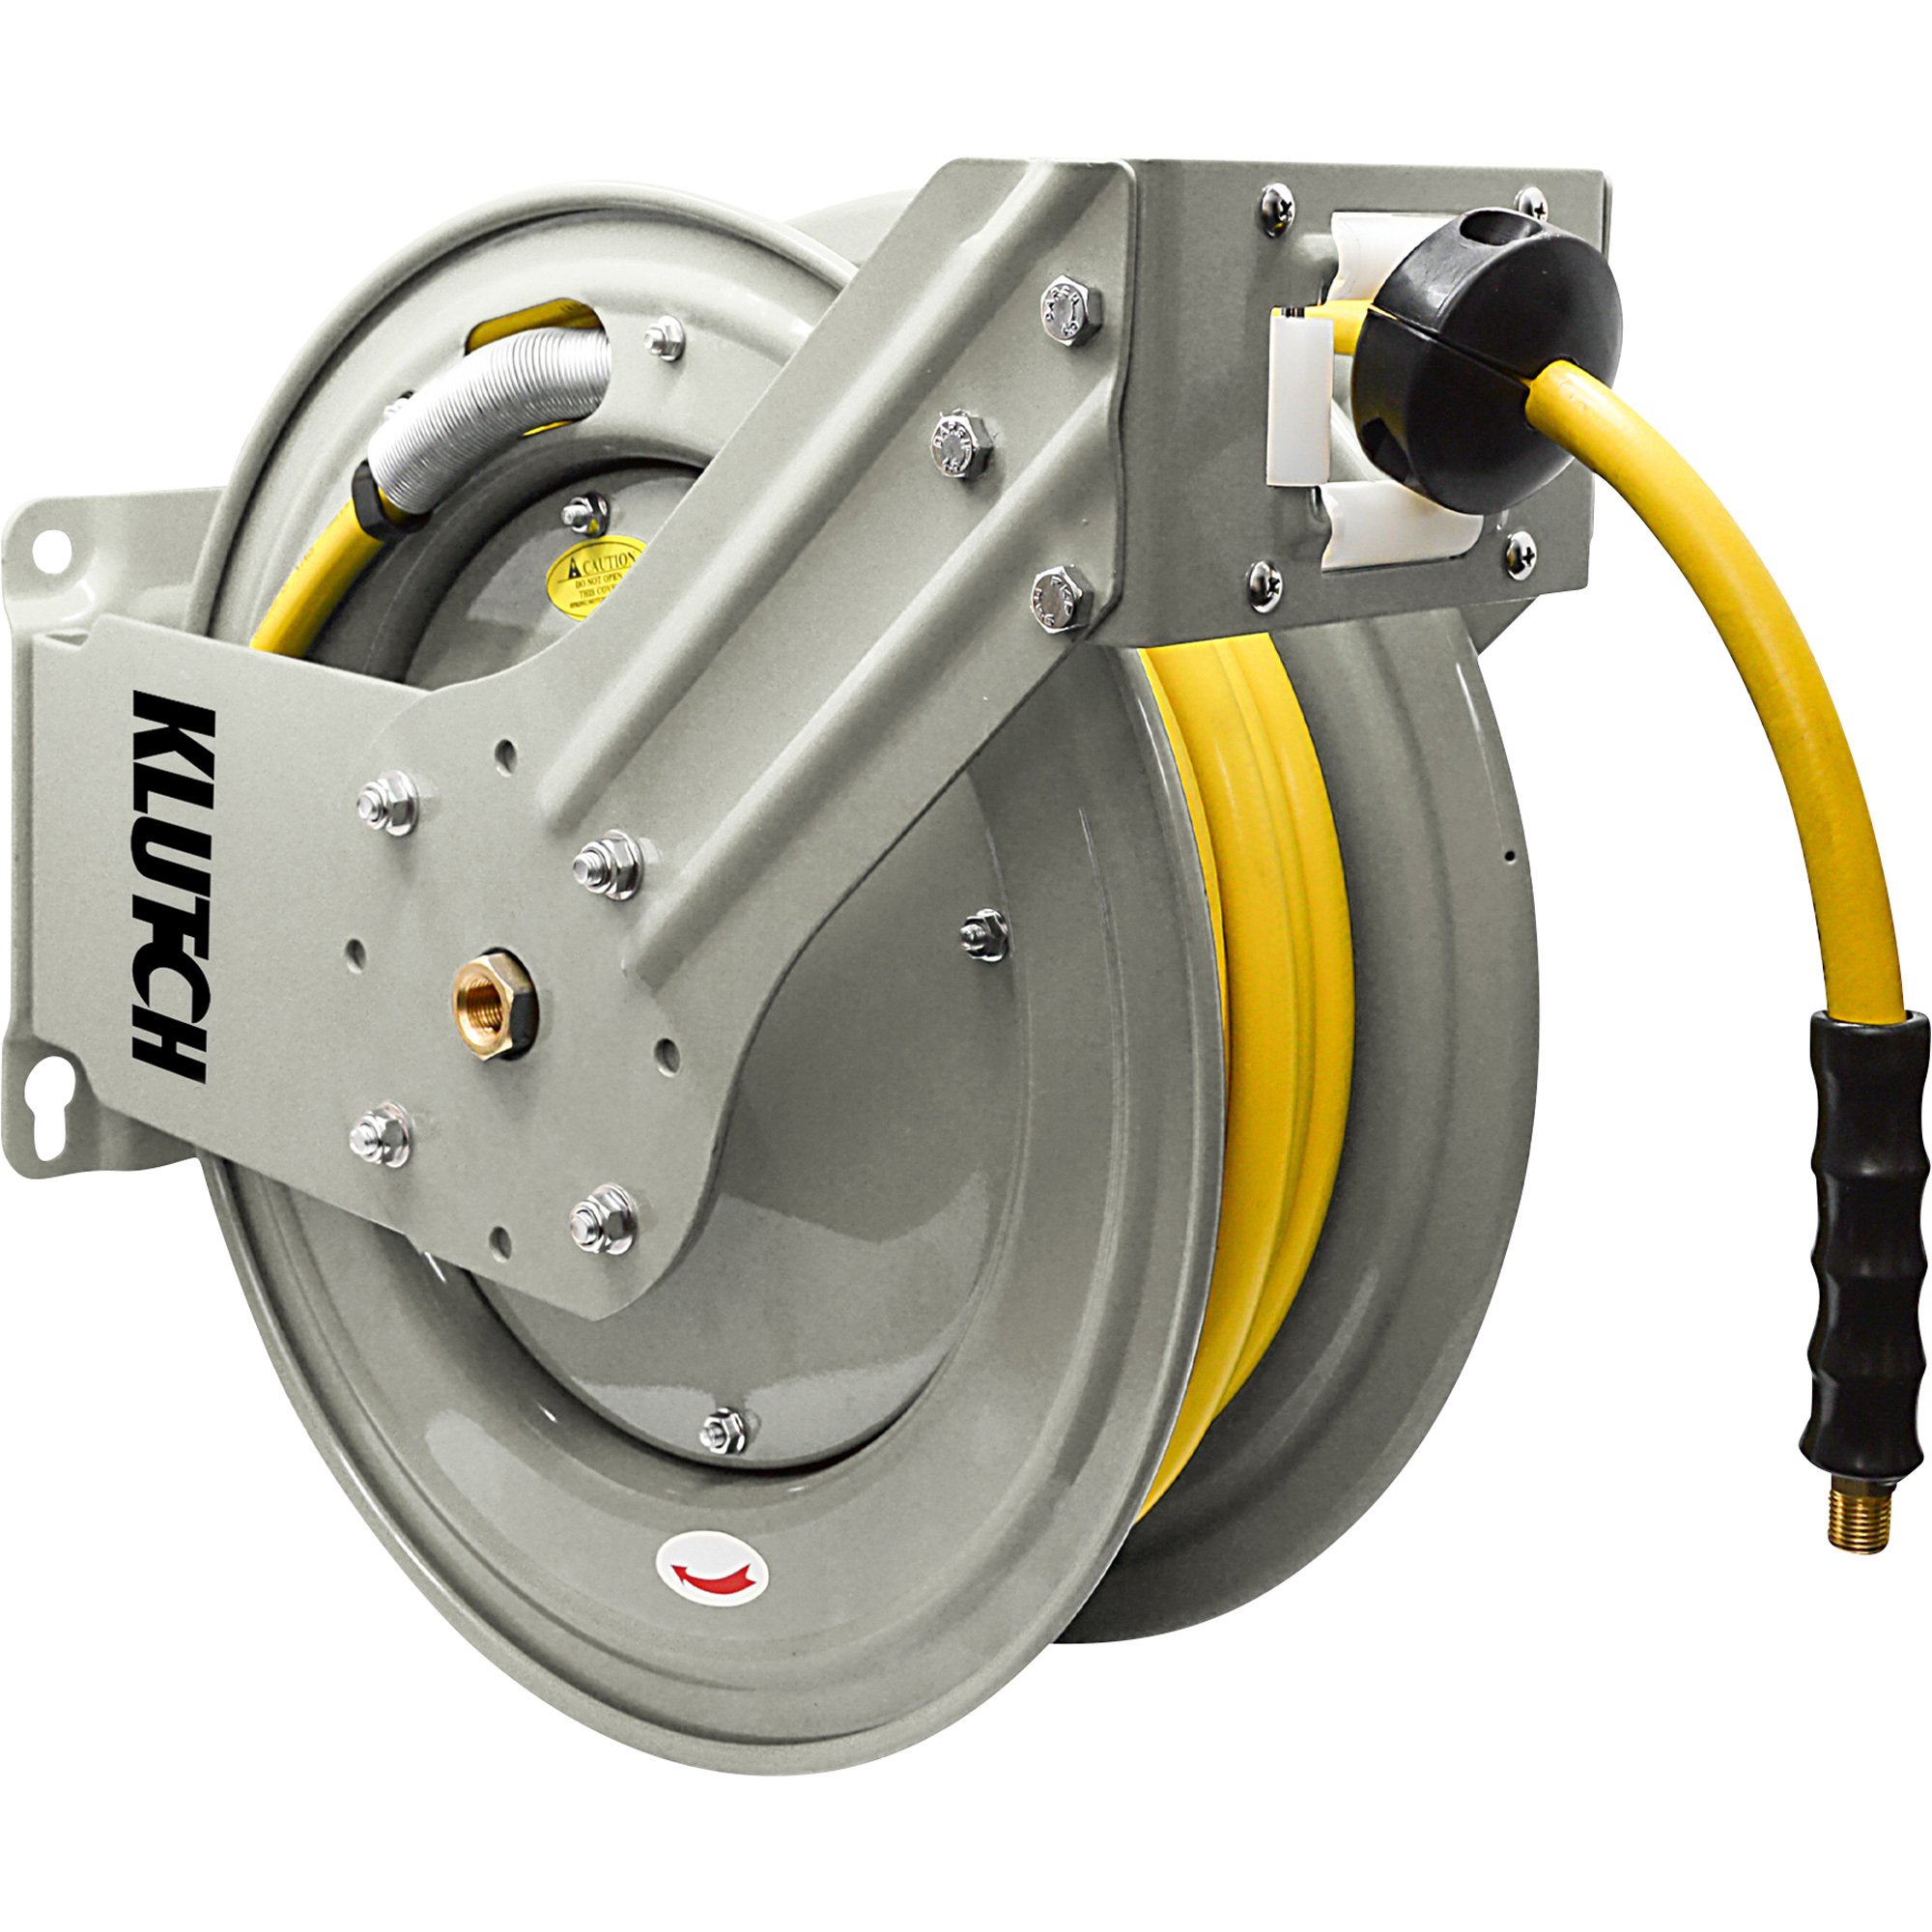 Klutch Auto-Rewind Dual Arm Air Hose Reel, with 3/8in. x 50ft. Hose, 300  PSI